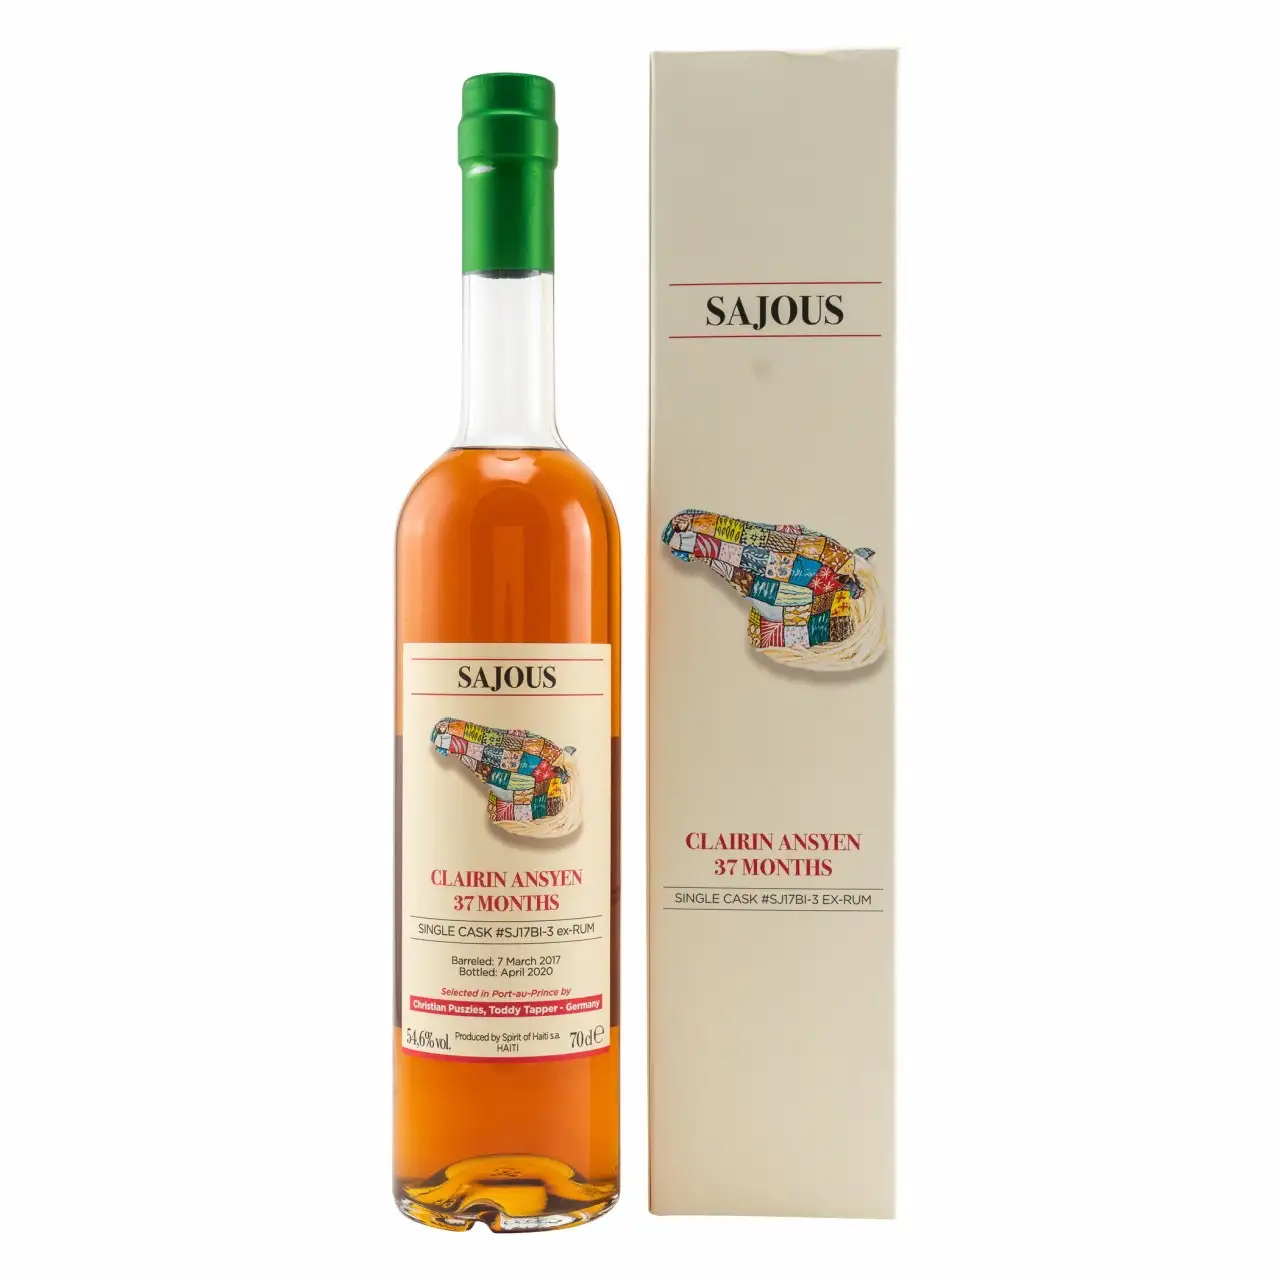 Image of the front of the bottle of the rum Clairin Ansyen Sajous (Bielle Cask)